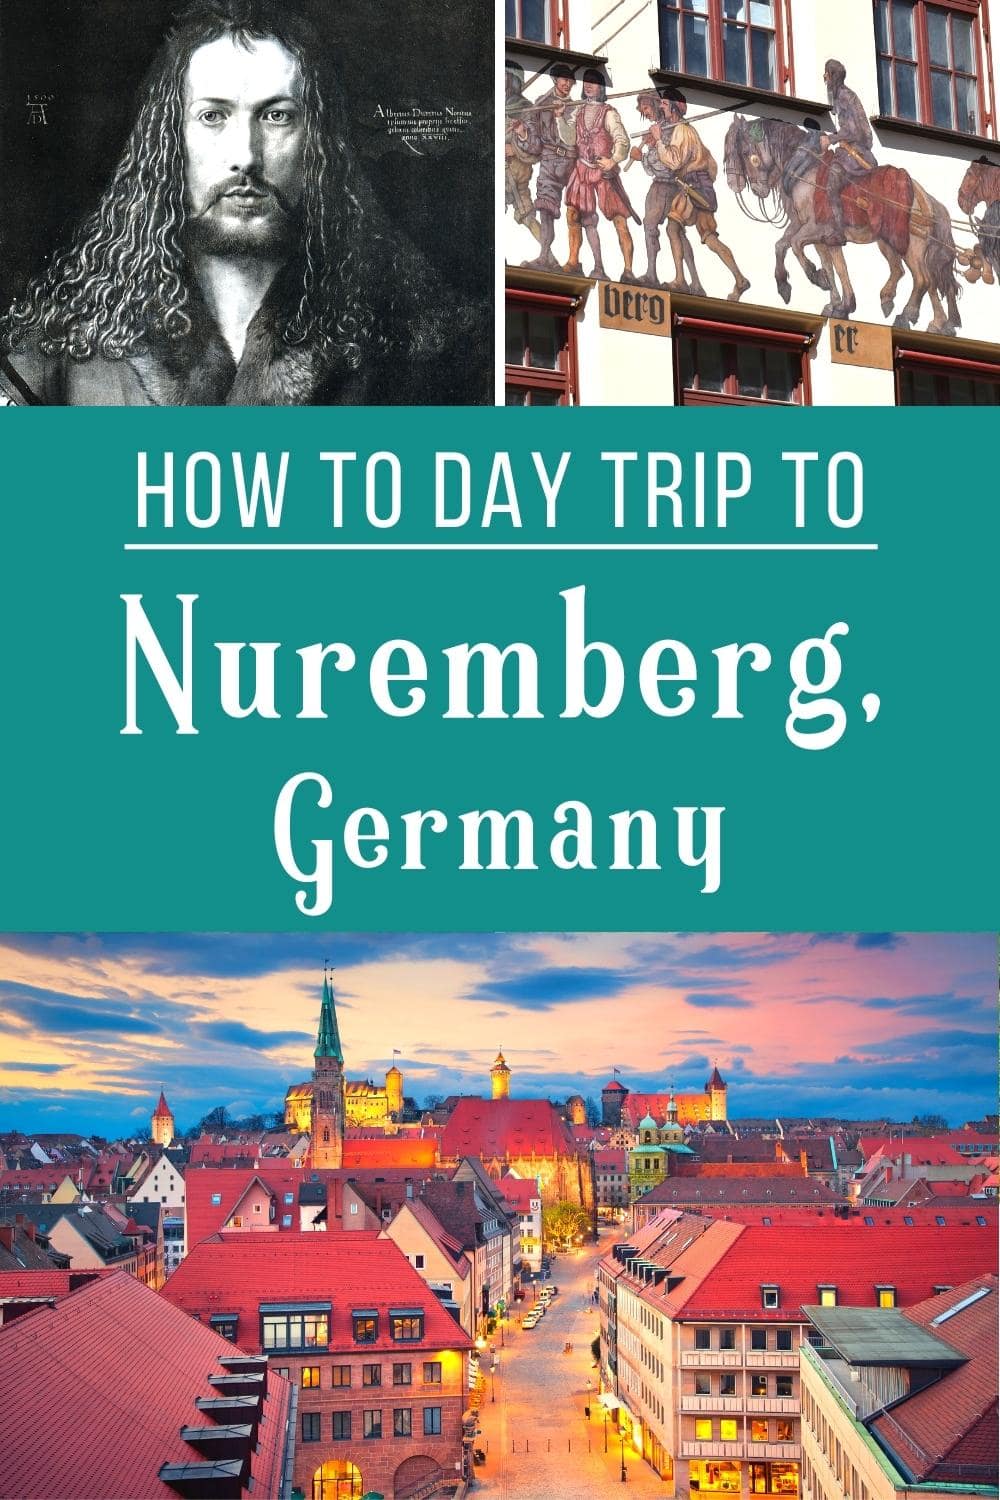 One Epic Day in Nuremberg: How to Day Trip to Nuremberg from Munich